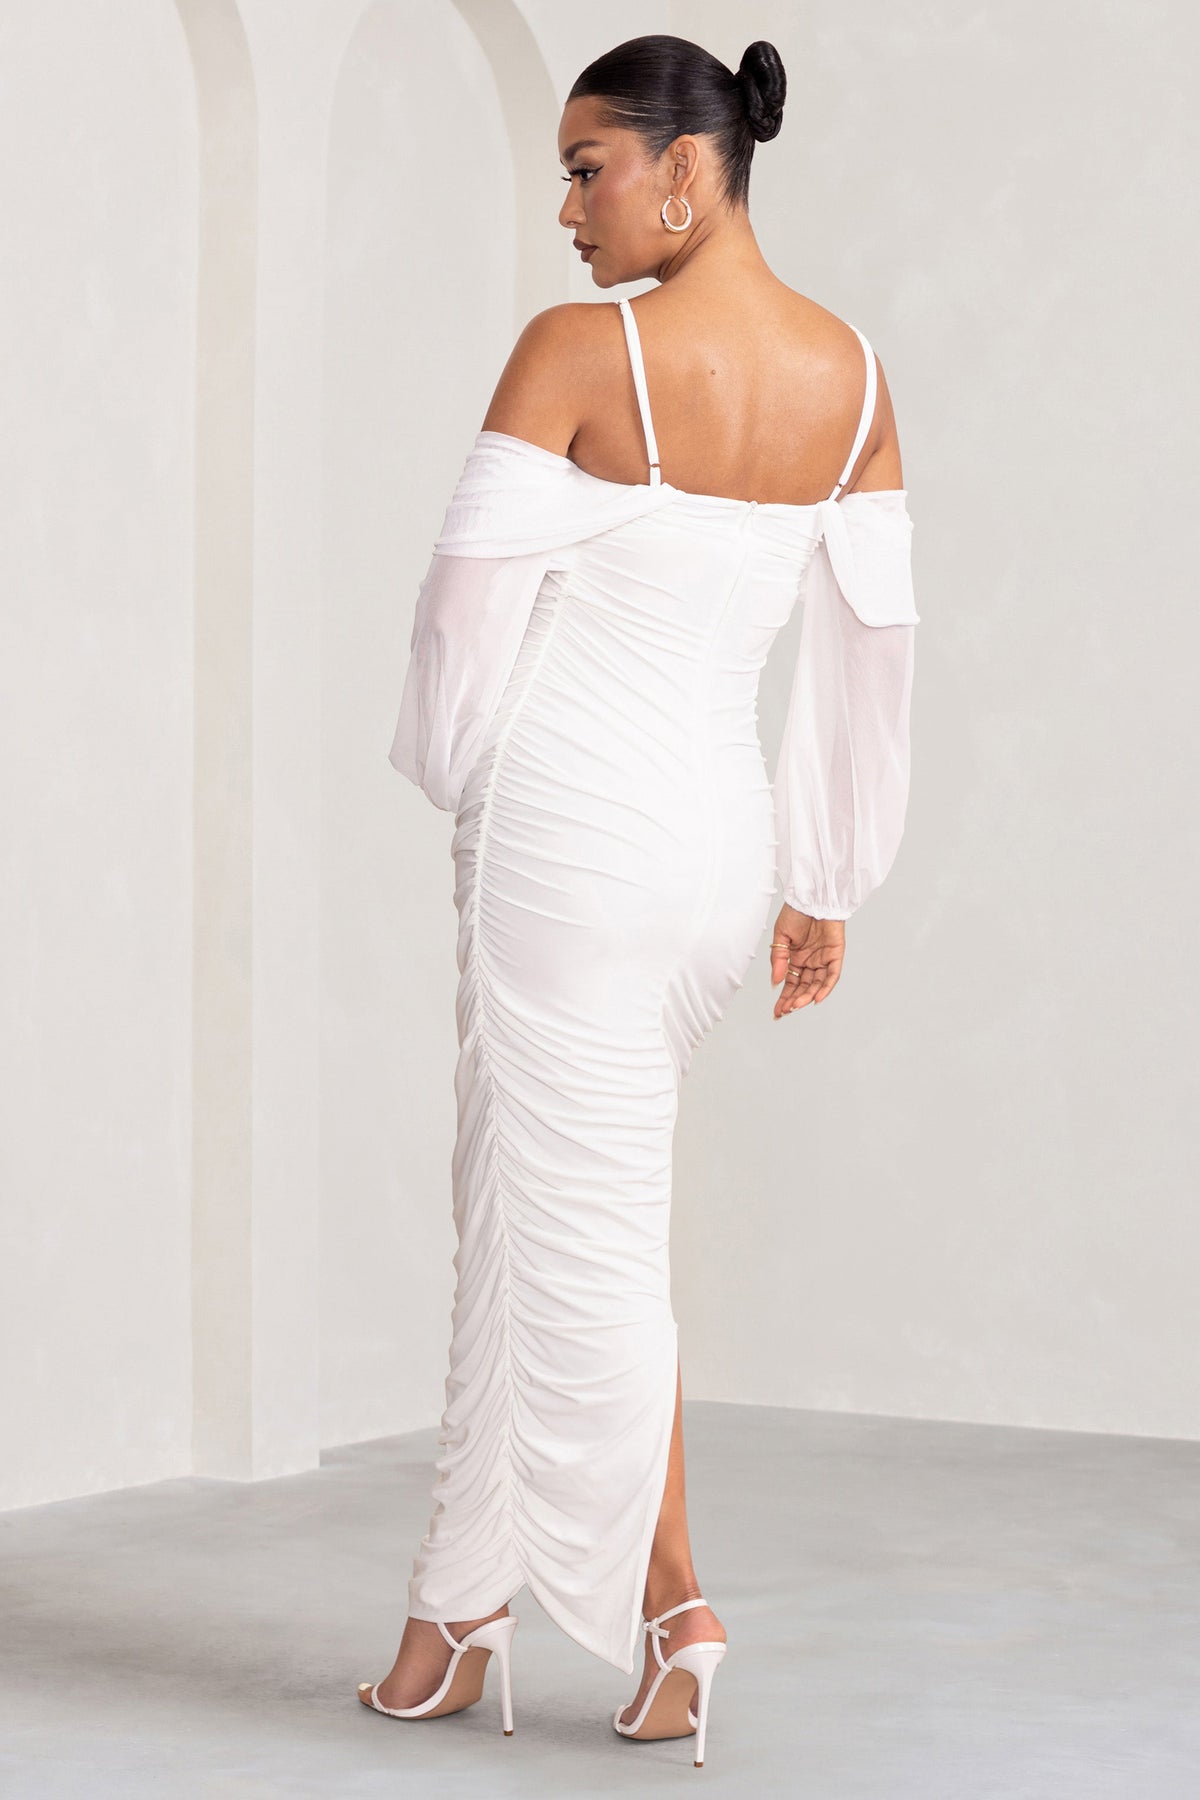 Invisible Shaping Maxi Brief in White – Perfect Silhouette